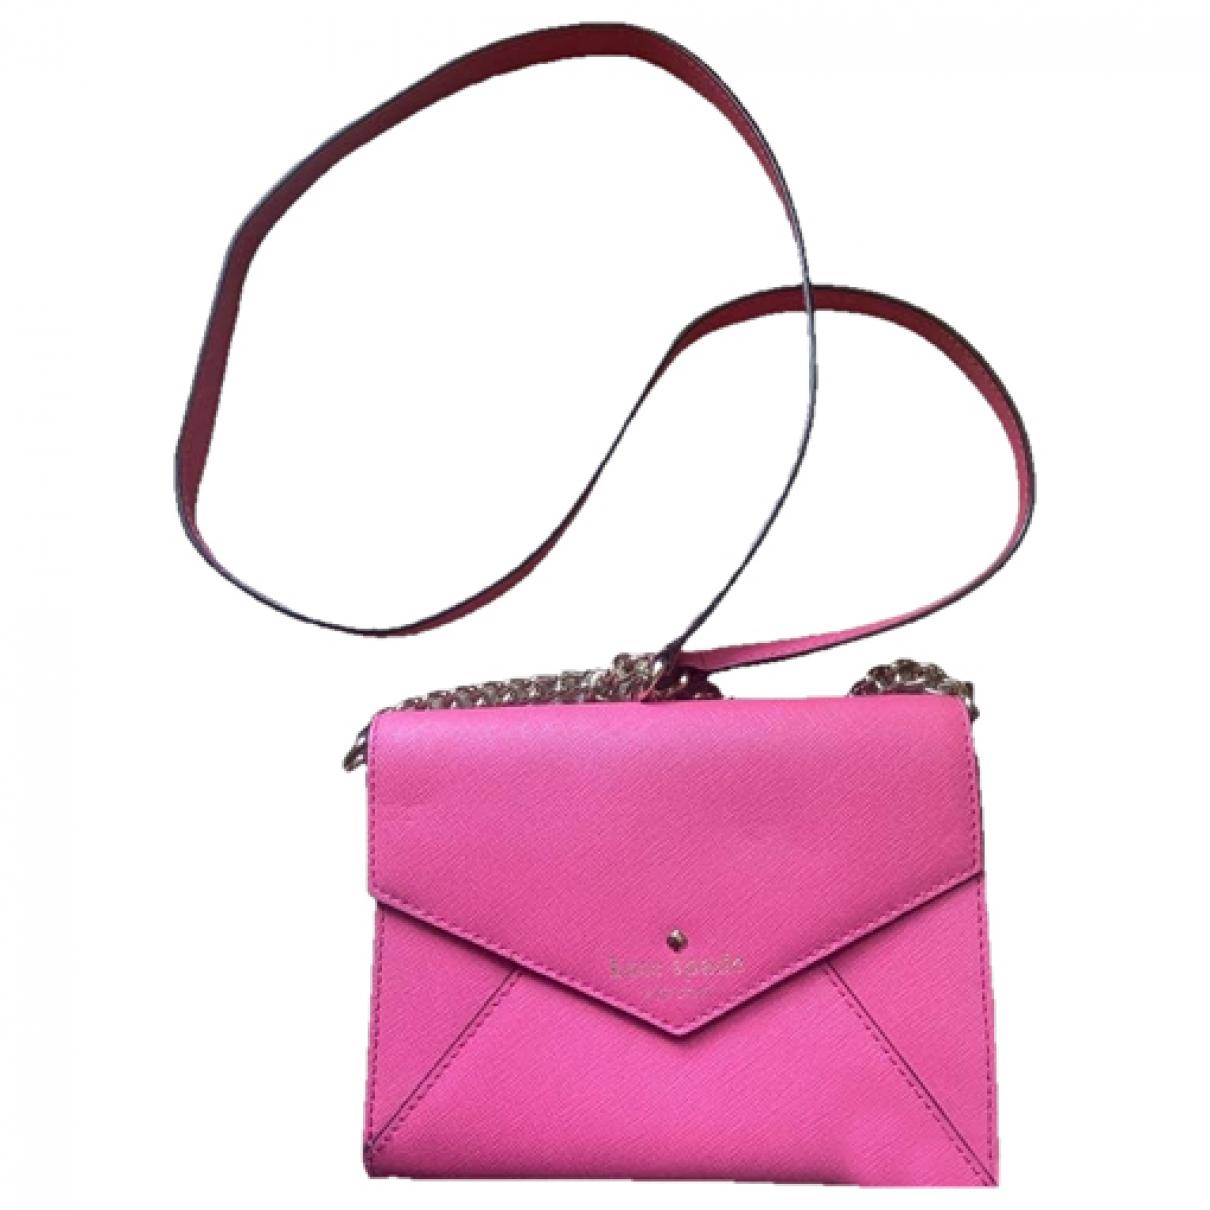 Leather crossbody bag Kate Spade Pink in Leather - 35609612